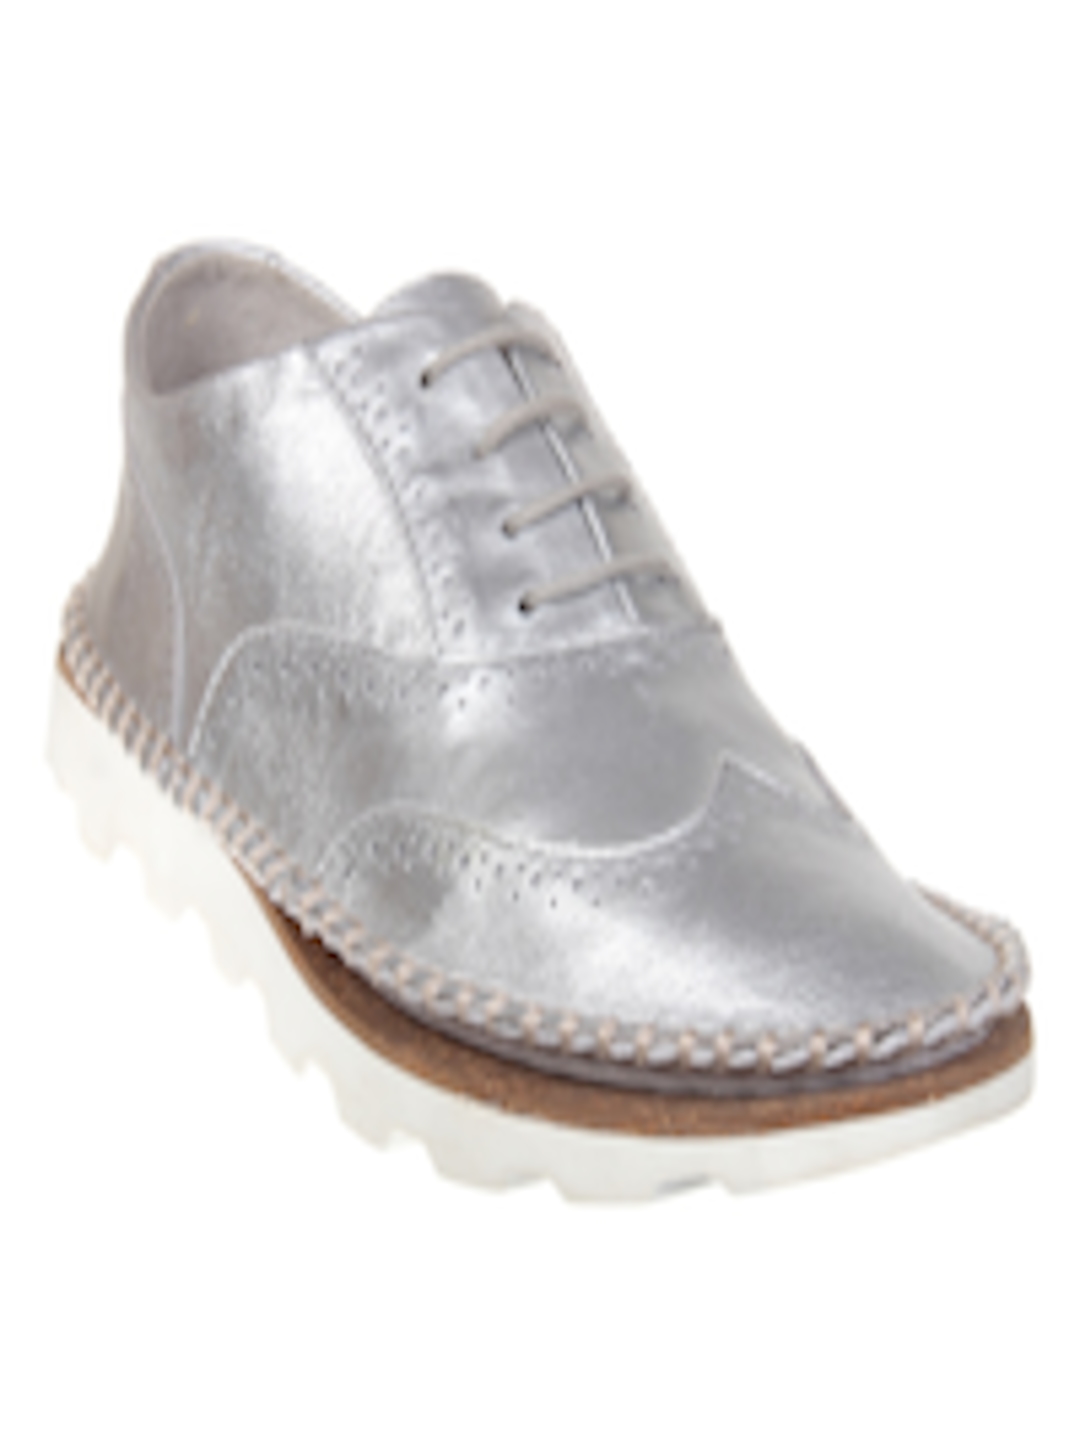 Buy Clarks Women Silver Toned Leather Brogues - Casual Shoes for Women ...